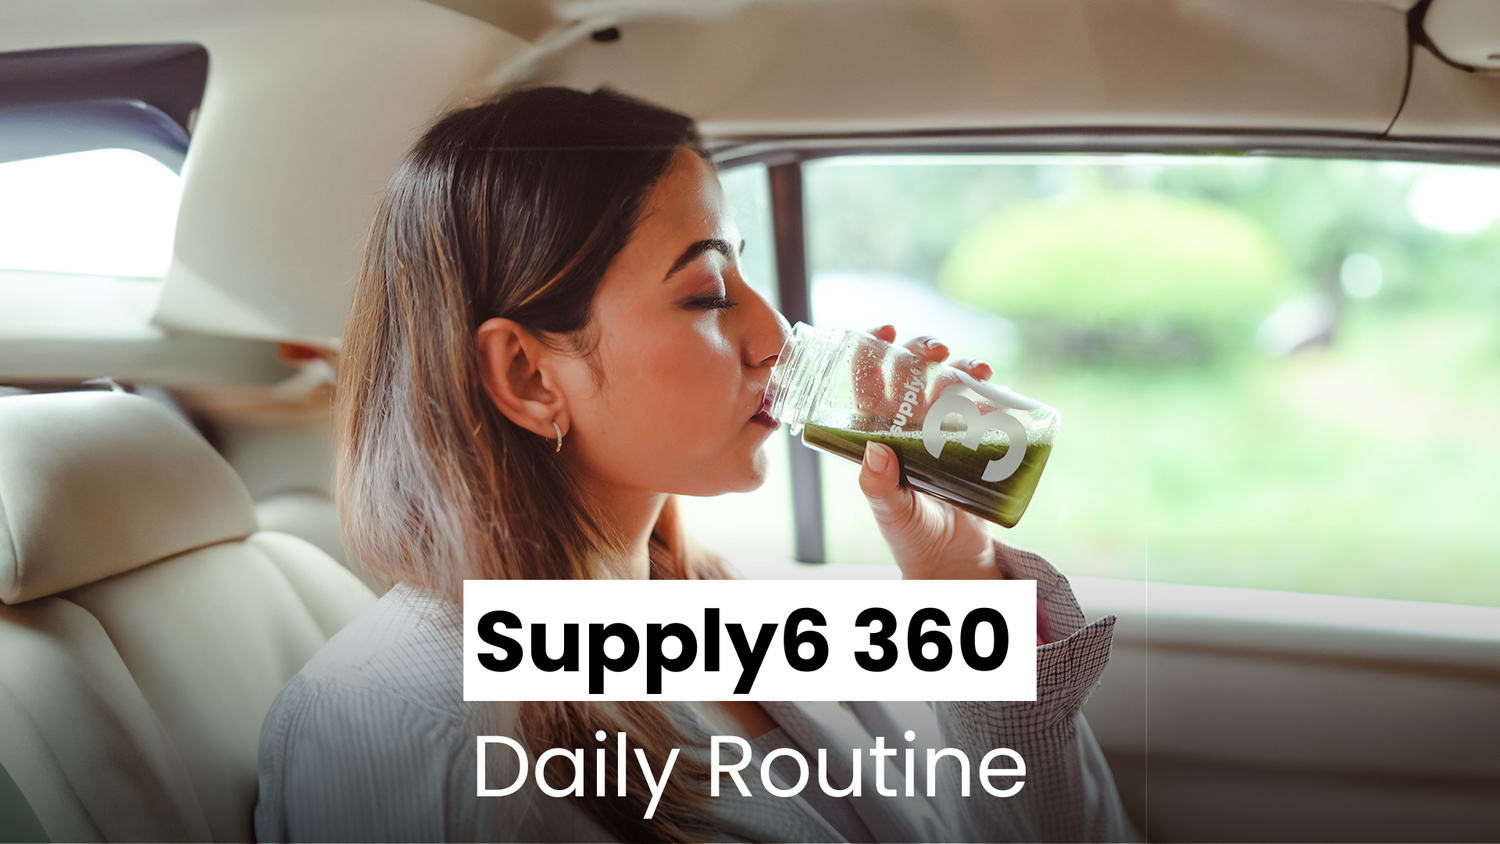 Why should you make Supply6 360 your routine?